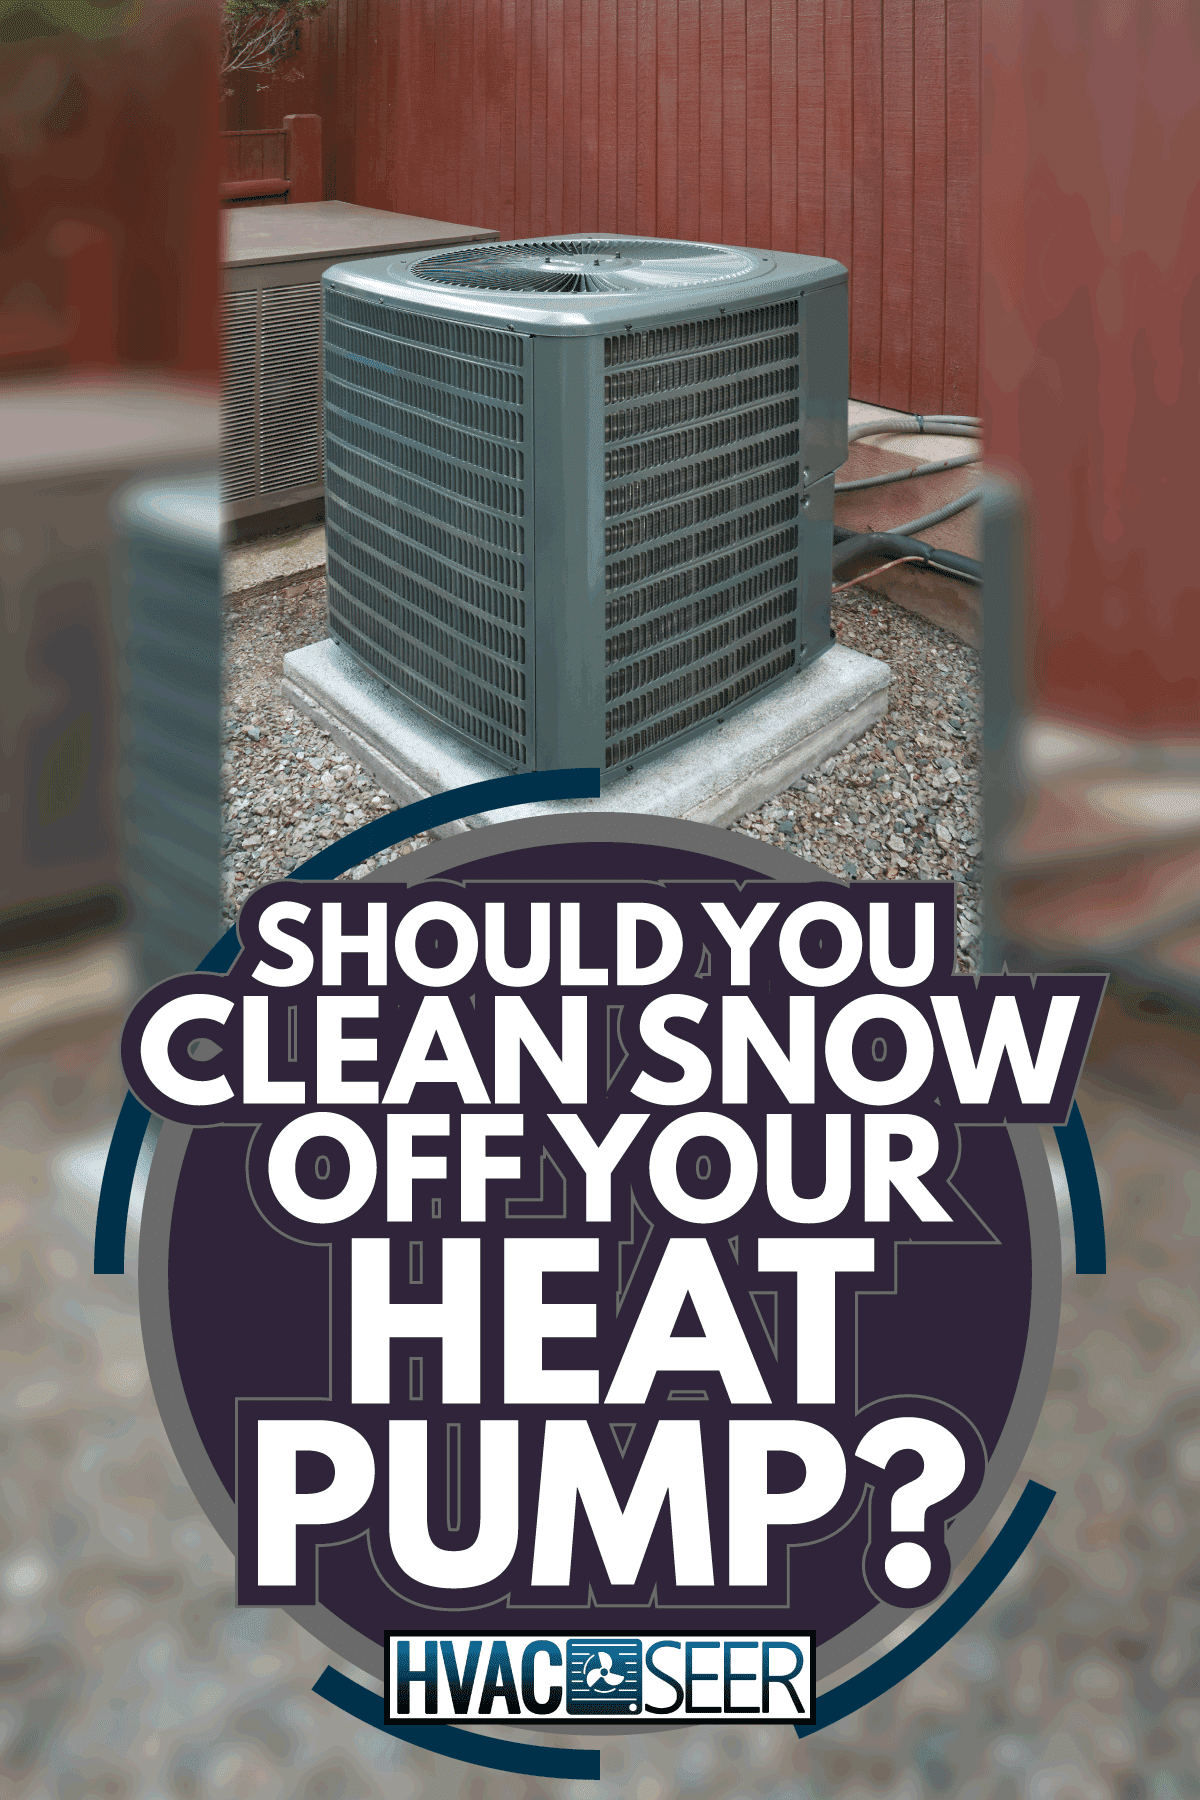 Heat pump and ac unit used to cool or heat a house. Should You Clean Snow Off Your Heat Pump